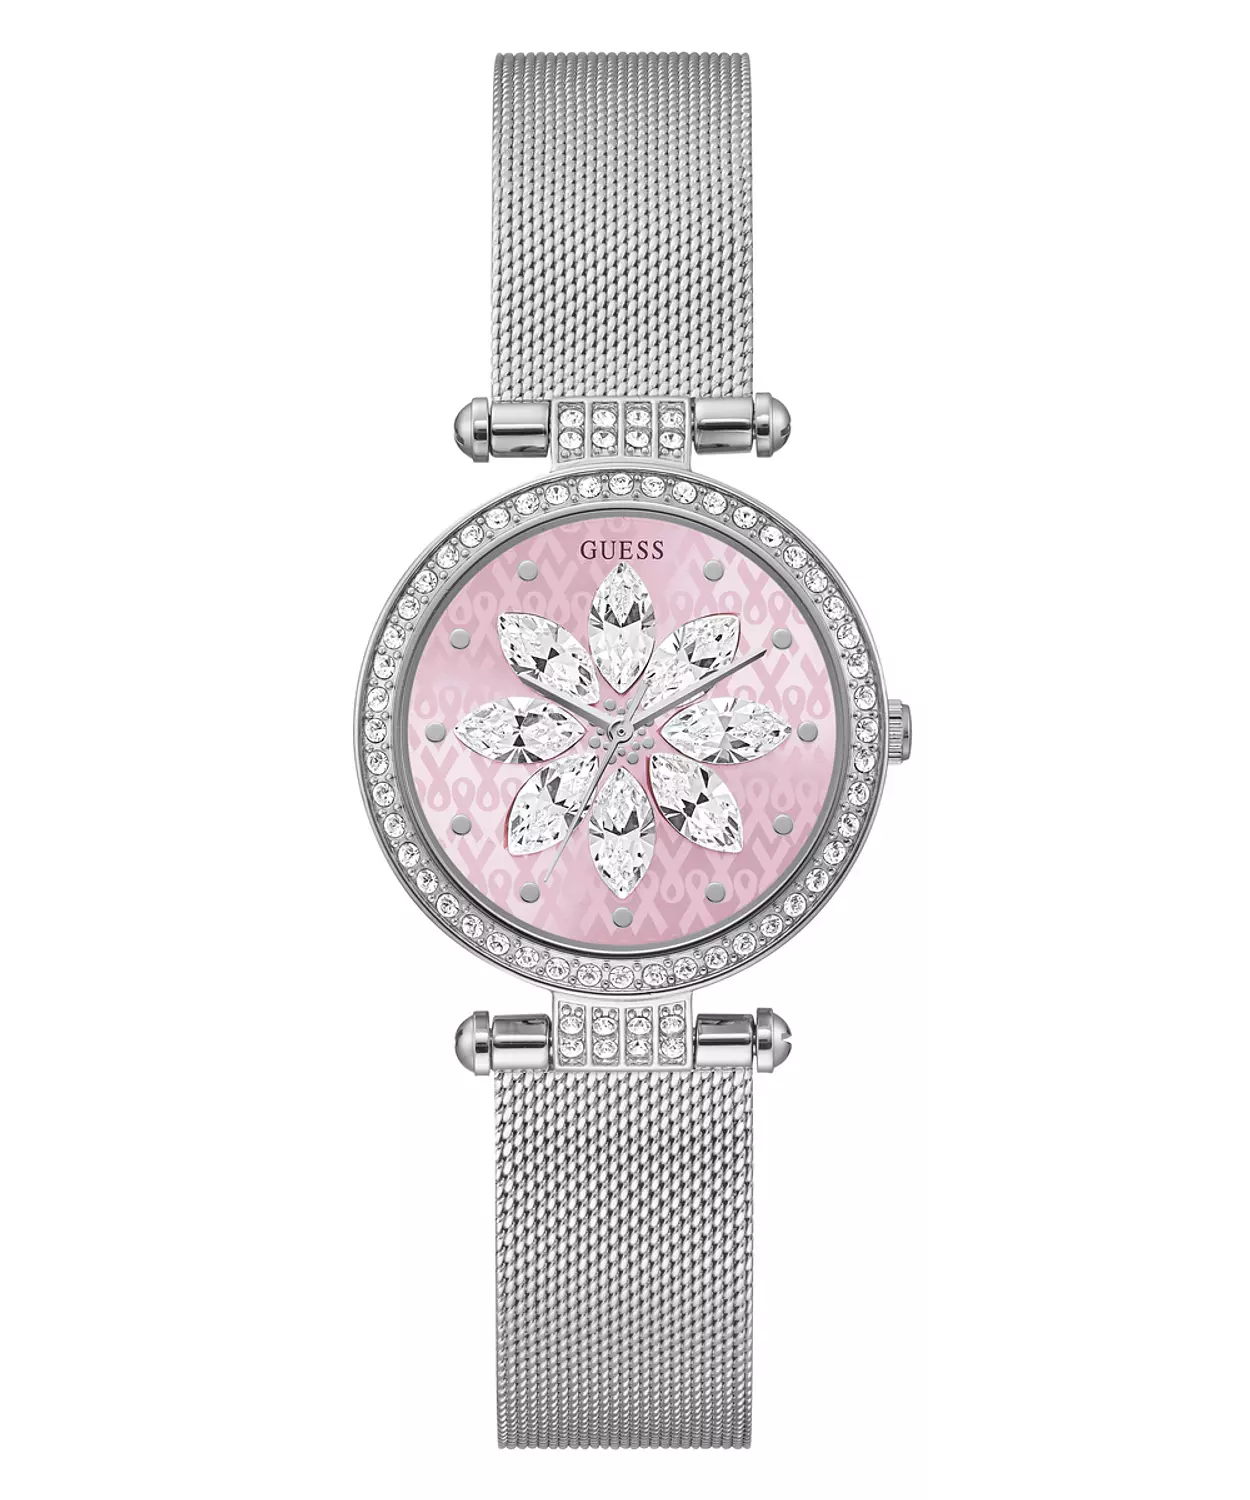 GUESS GW0032L3 ANALOG WATCH For Women Round Shape Silver Stainless Steel/Mesh Polished Bracelet hover image